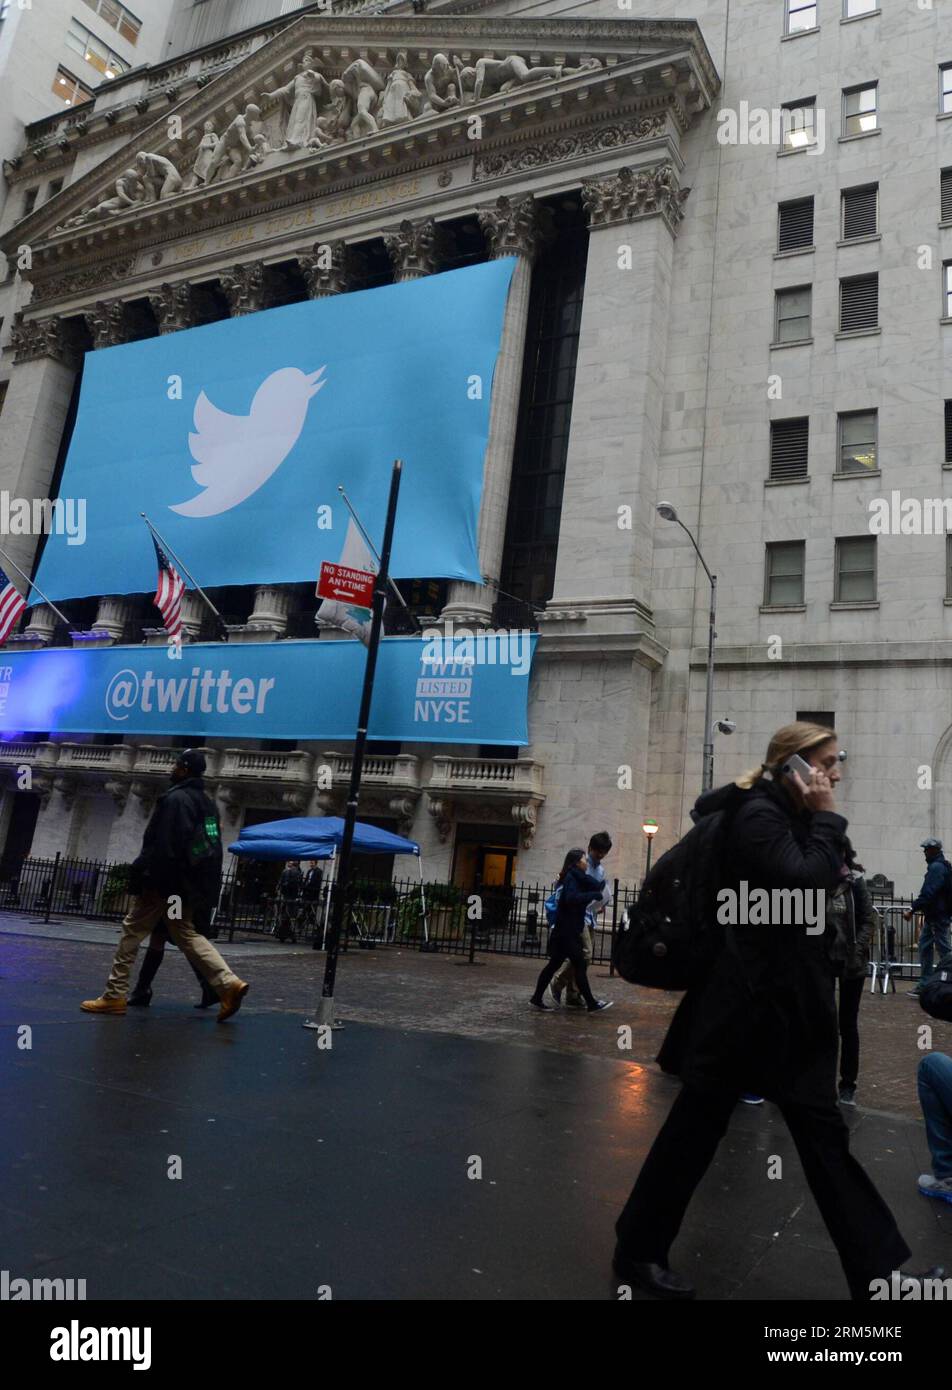 Bildnummer: 60688266  Datum: 07.11.2013  Copyright: imago/Xinhua (131107) -- NEW YORK, Nov. 7, 2013 (Xinhua) -- Pedestrians pass by a giant logo of Twitter hanging on the front gate of the New York Stock Exchange (NYSE) in New York, U.S., Nov. 7, 2013. Social network giant Twitter Inc. began trading under the symbol TWTR on the New York Stock Exchange and closed at 44.9 dollars on Thursday. (Xinhua/Wang Lei) US-NEW YORK-NYSE-TWITTER-IPO PUBLICATIONxNOTxINxCHN Wirtschaft NYSE Börse Börsengang Twitter xdp x0x 2013 hoch premiumd      60688266 Date 07 11 2013 Copyright Imago XINHUA  New York Nov 7 Stock Photo